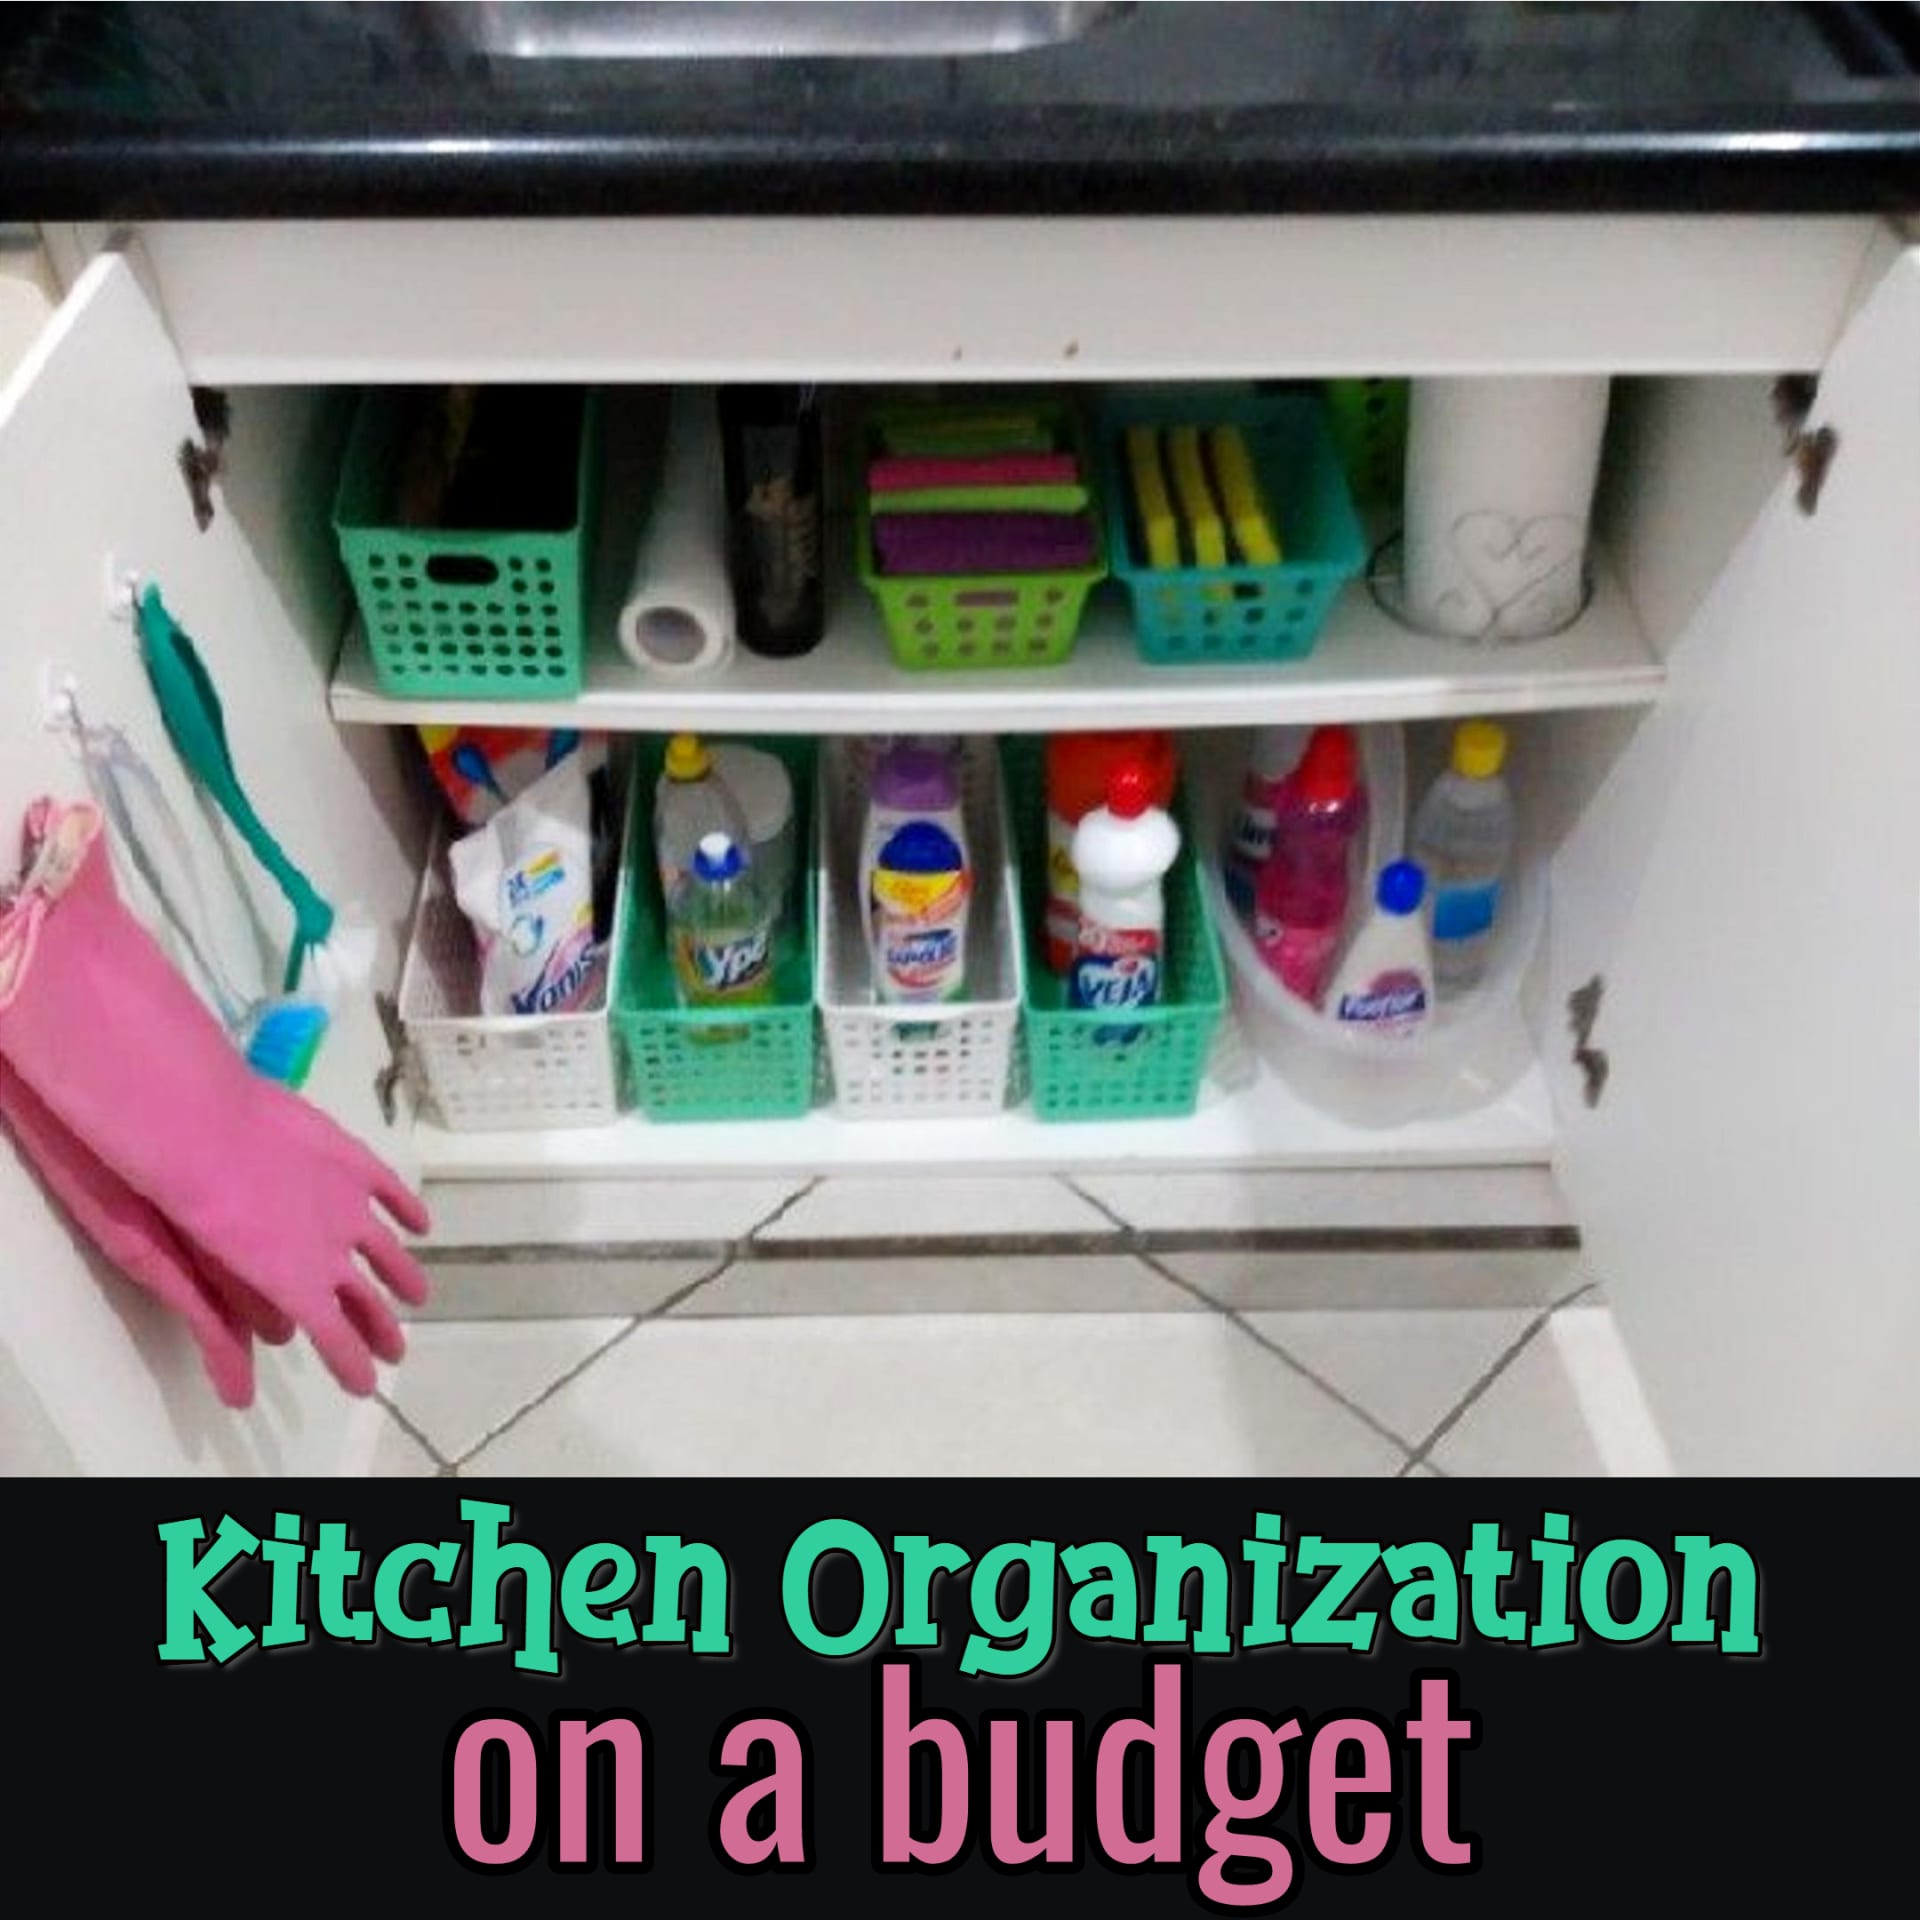 Kitchen Organization On a Budget - creative ways to organize your kitchen! cheap kitchen organization ideas for organizing your kitchen on a budget with simple Dollar Stores organizing ideas